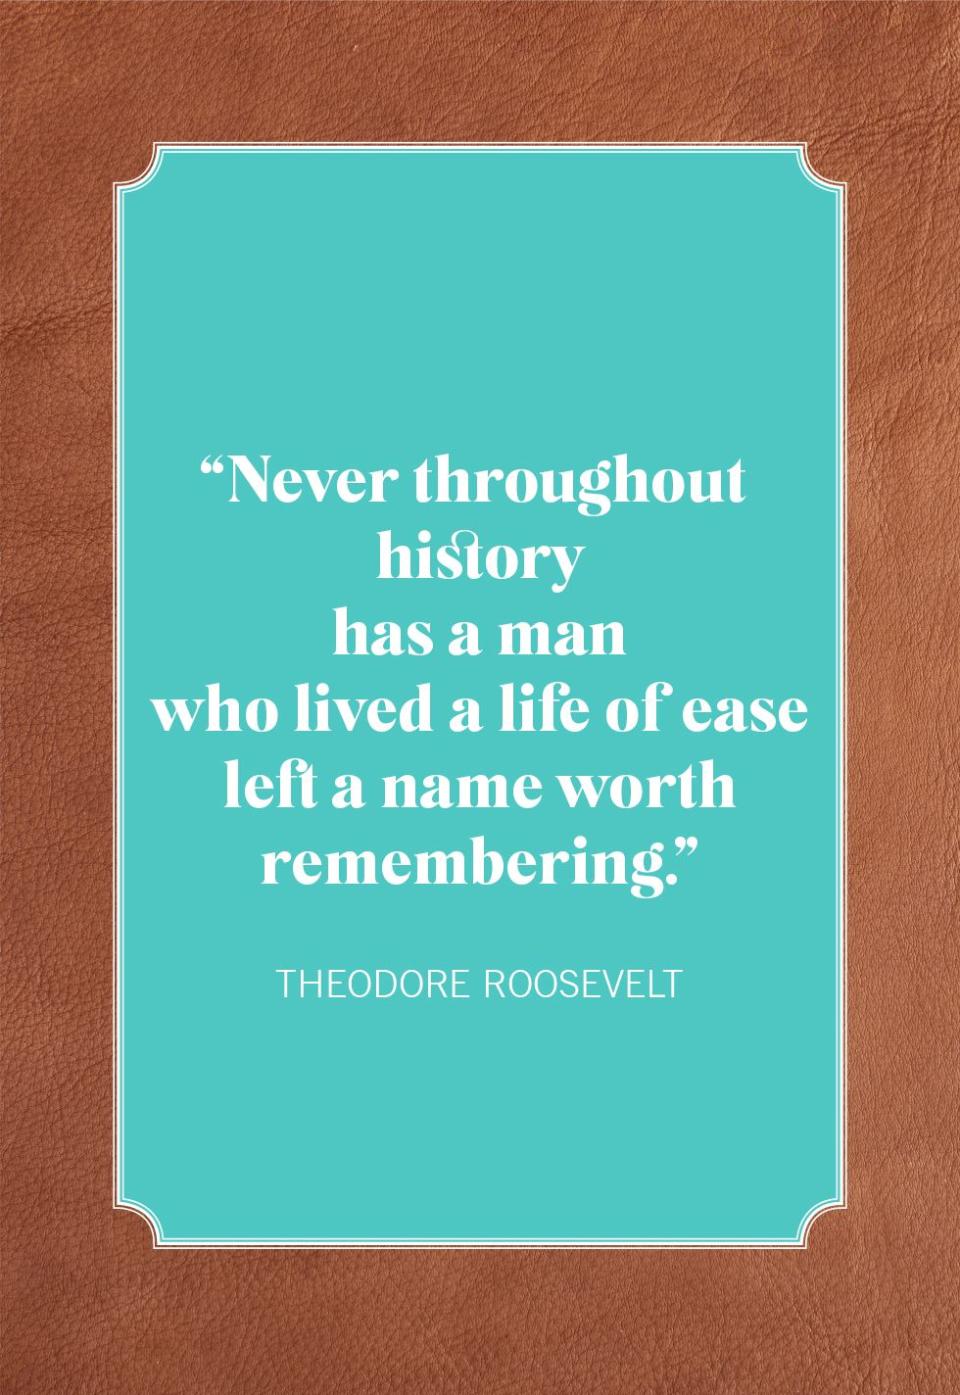 memorial day quotes theodore roosevelt